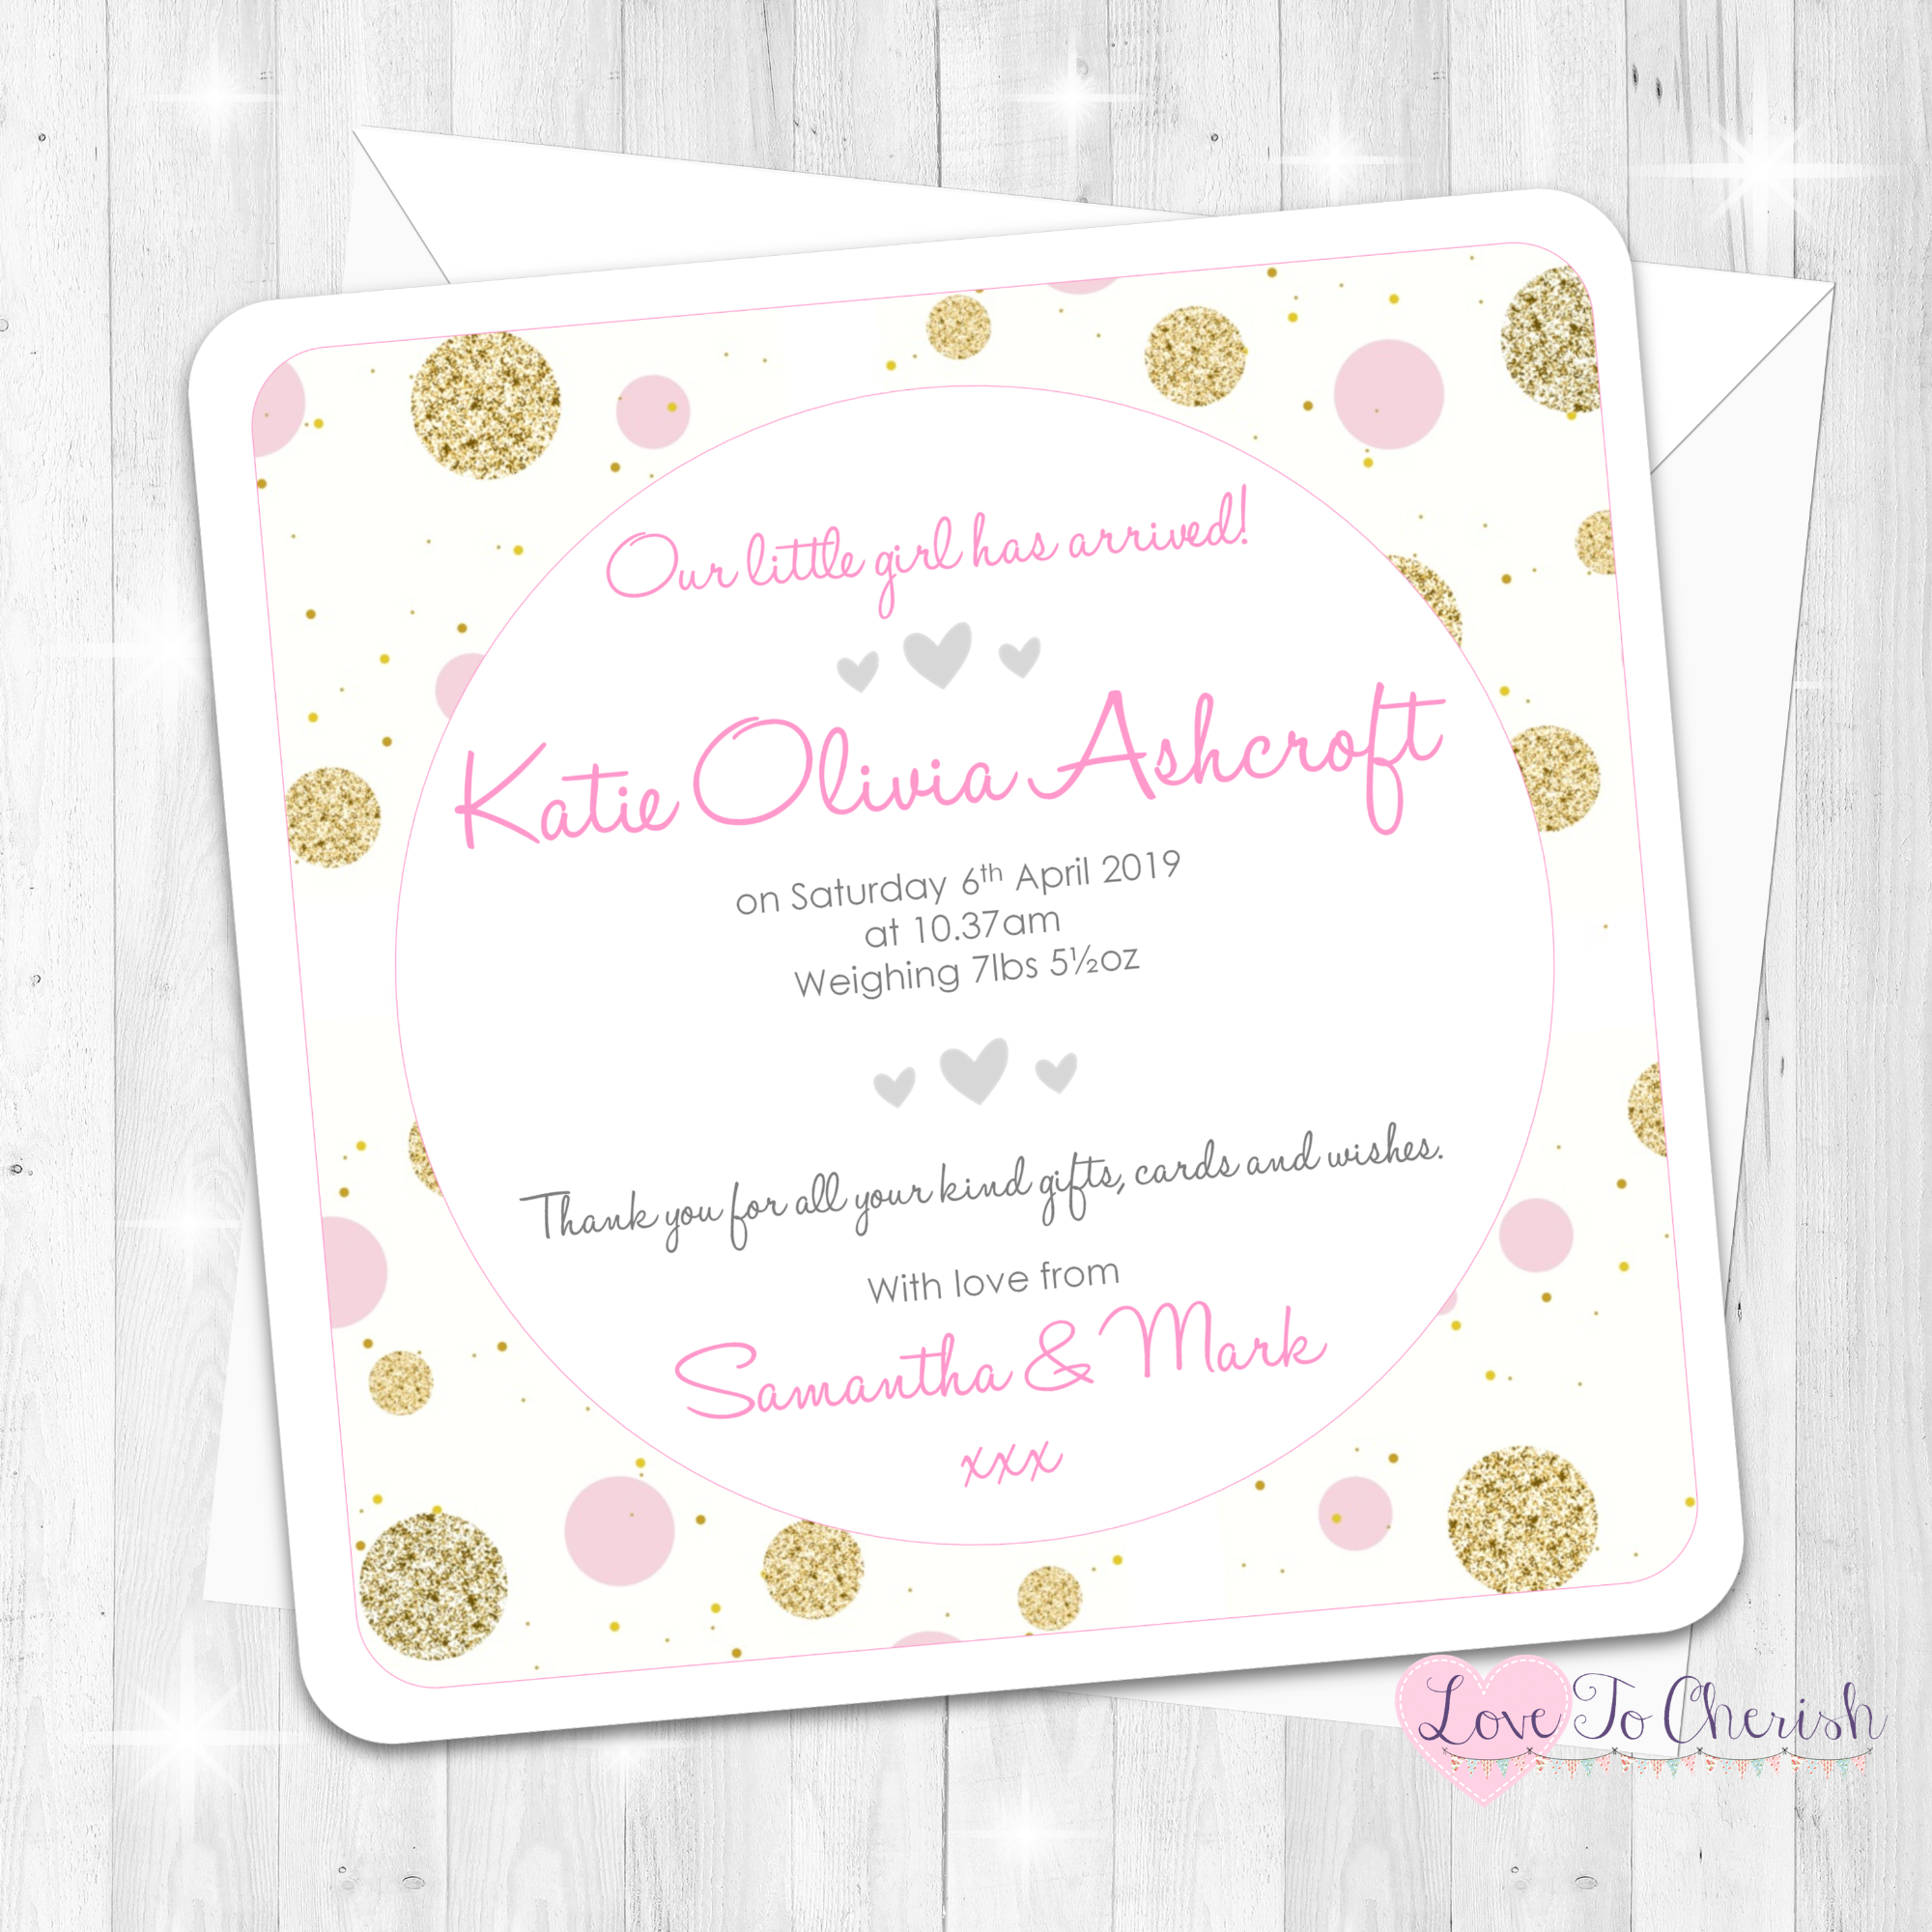 Baby Birth Announcement Cards